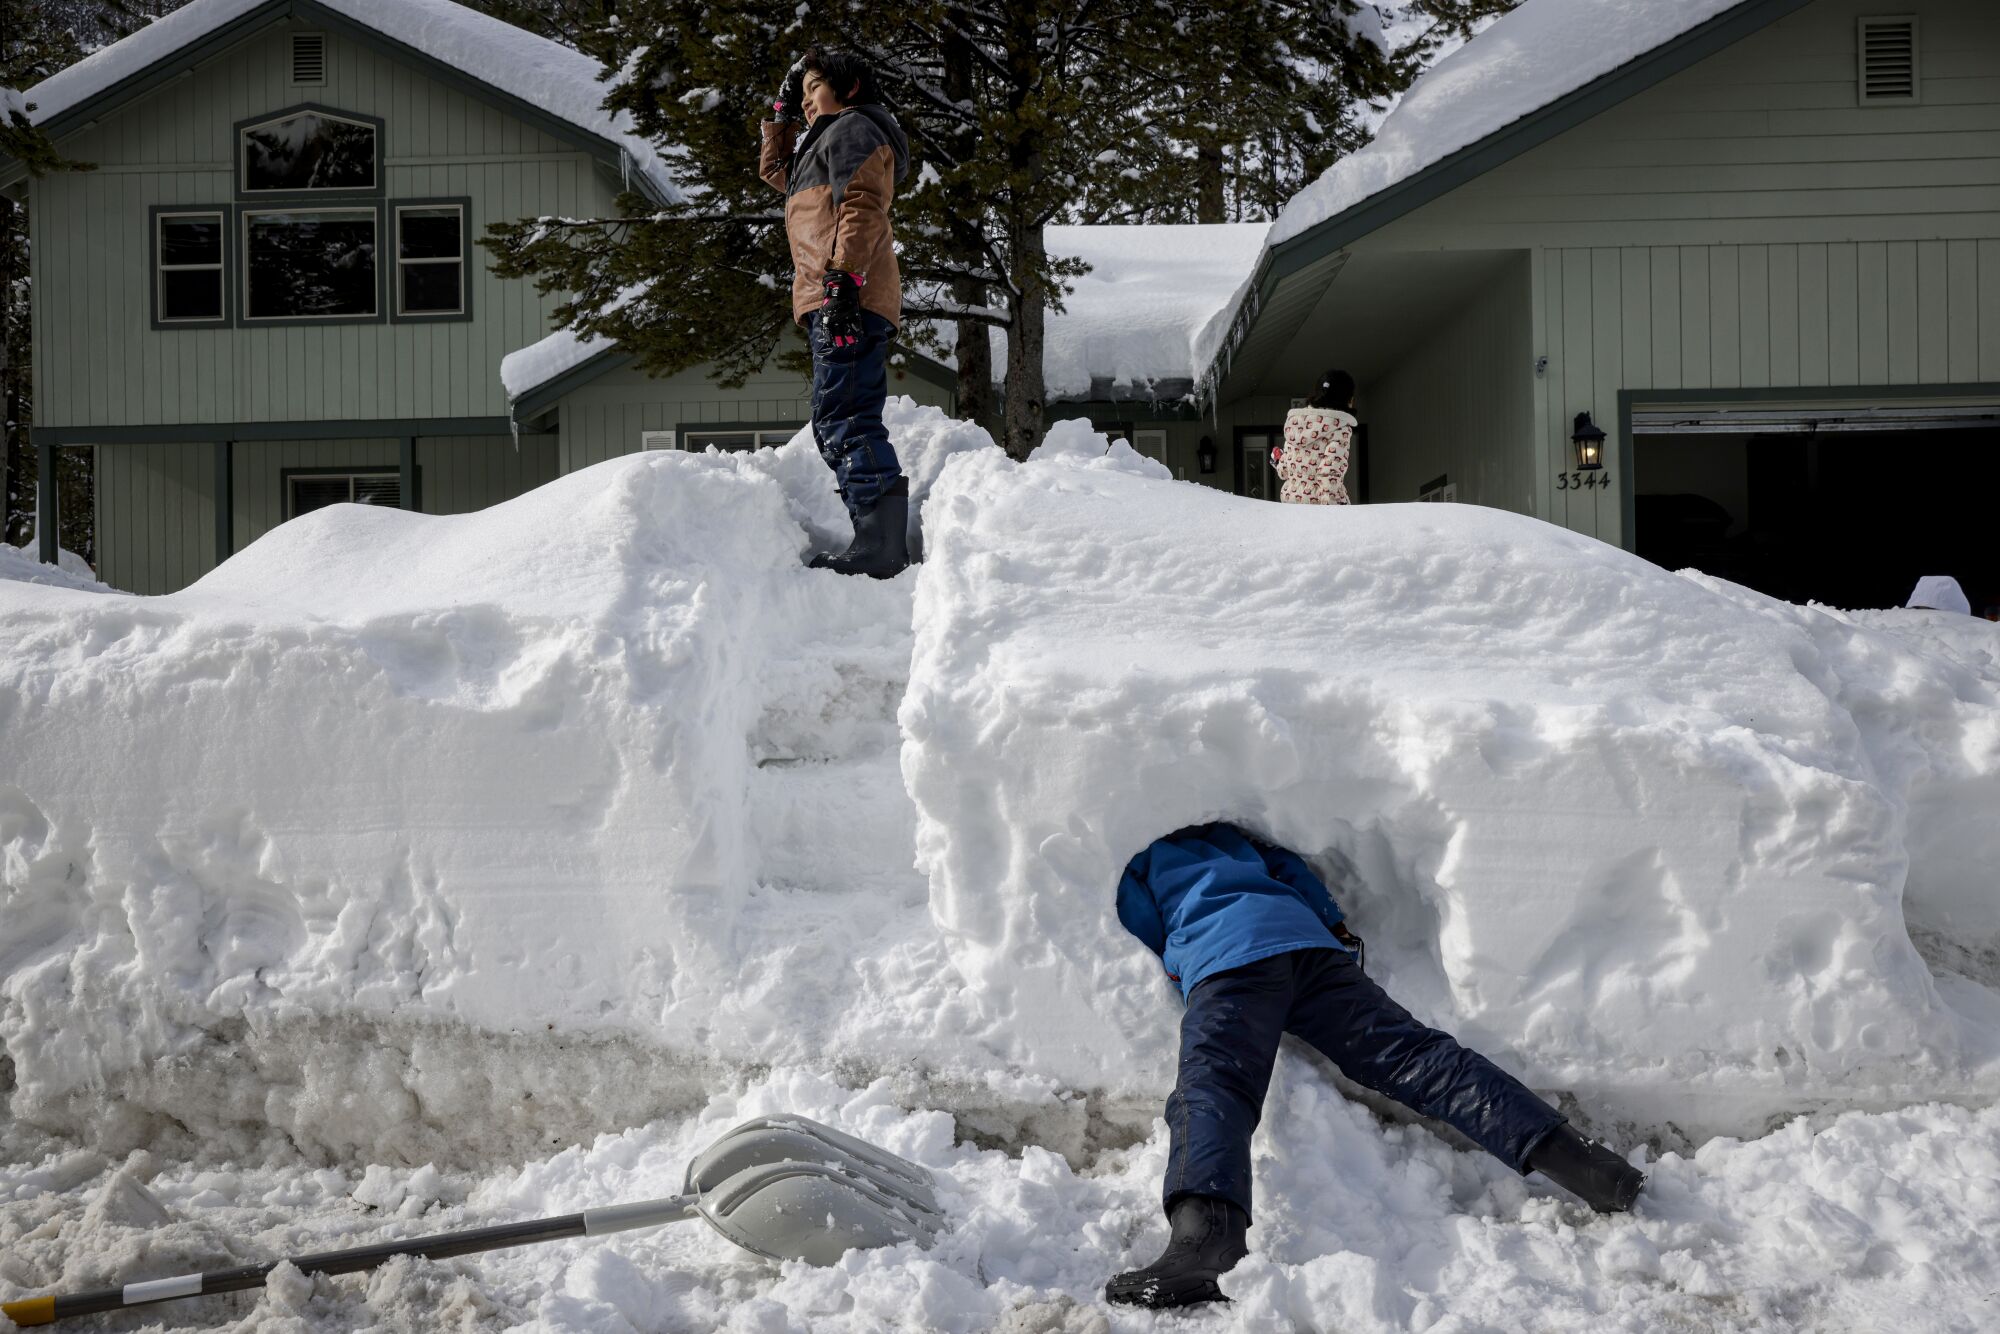 Boys play in the snow Wednesday in a community near South Lake Tahoe.